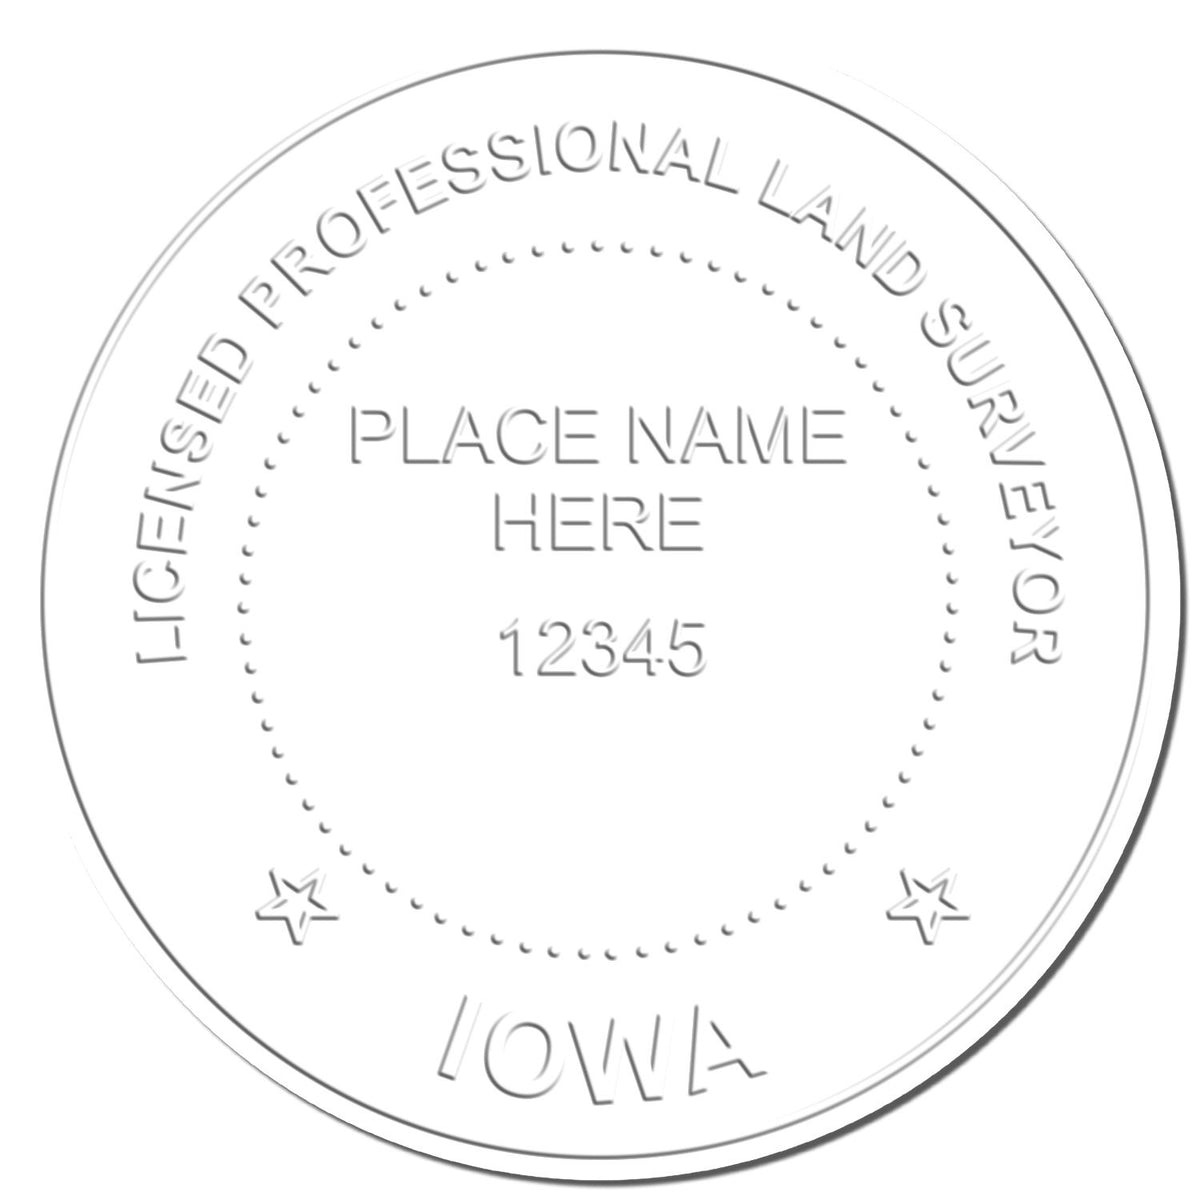 This paper is stamped with a sample imprint of the Heavy Duty Cast Iron Iowa Land Surveyor Seal Embosser, signifying its quality and reliability.